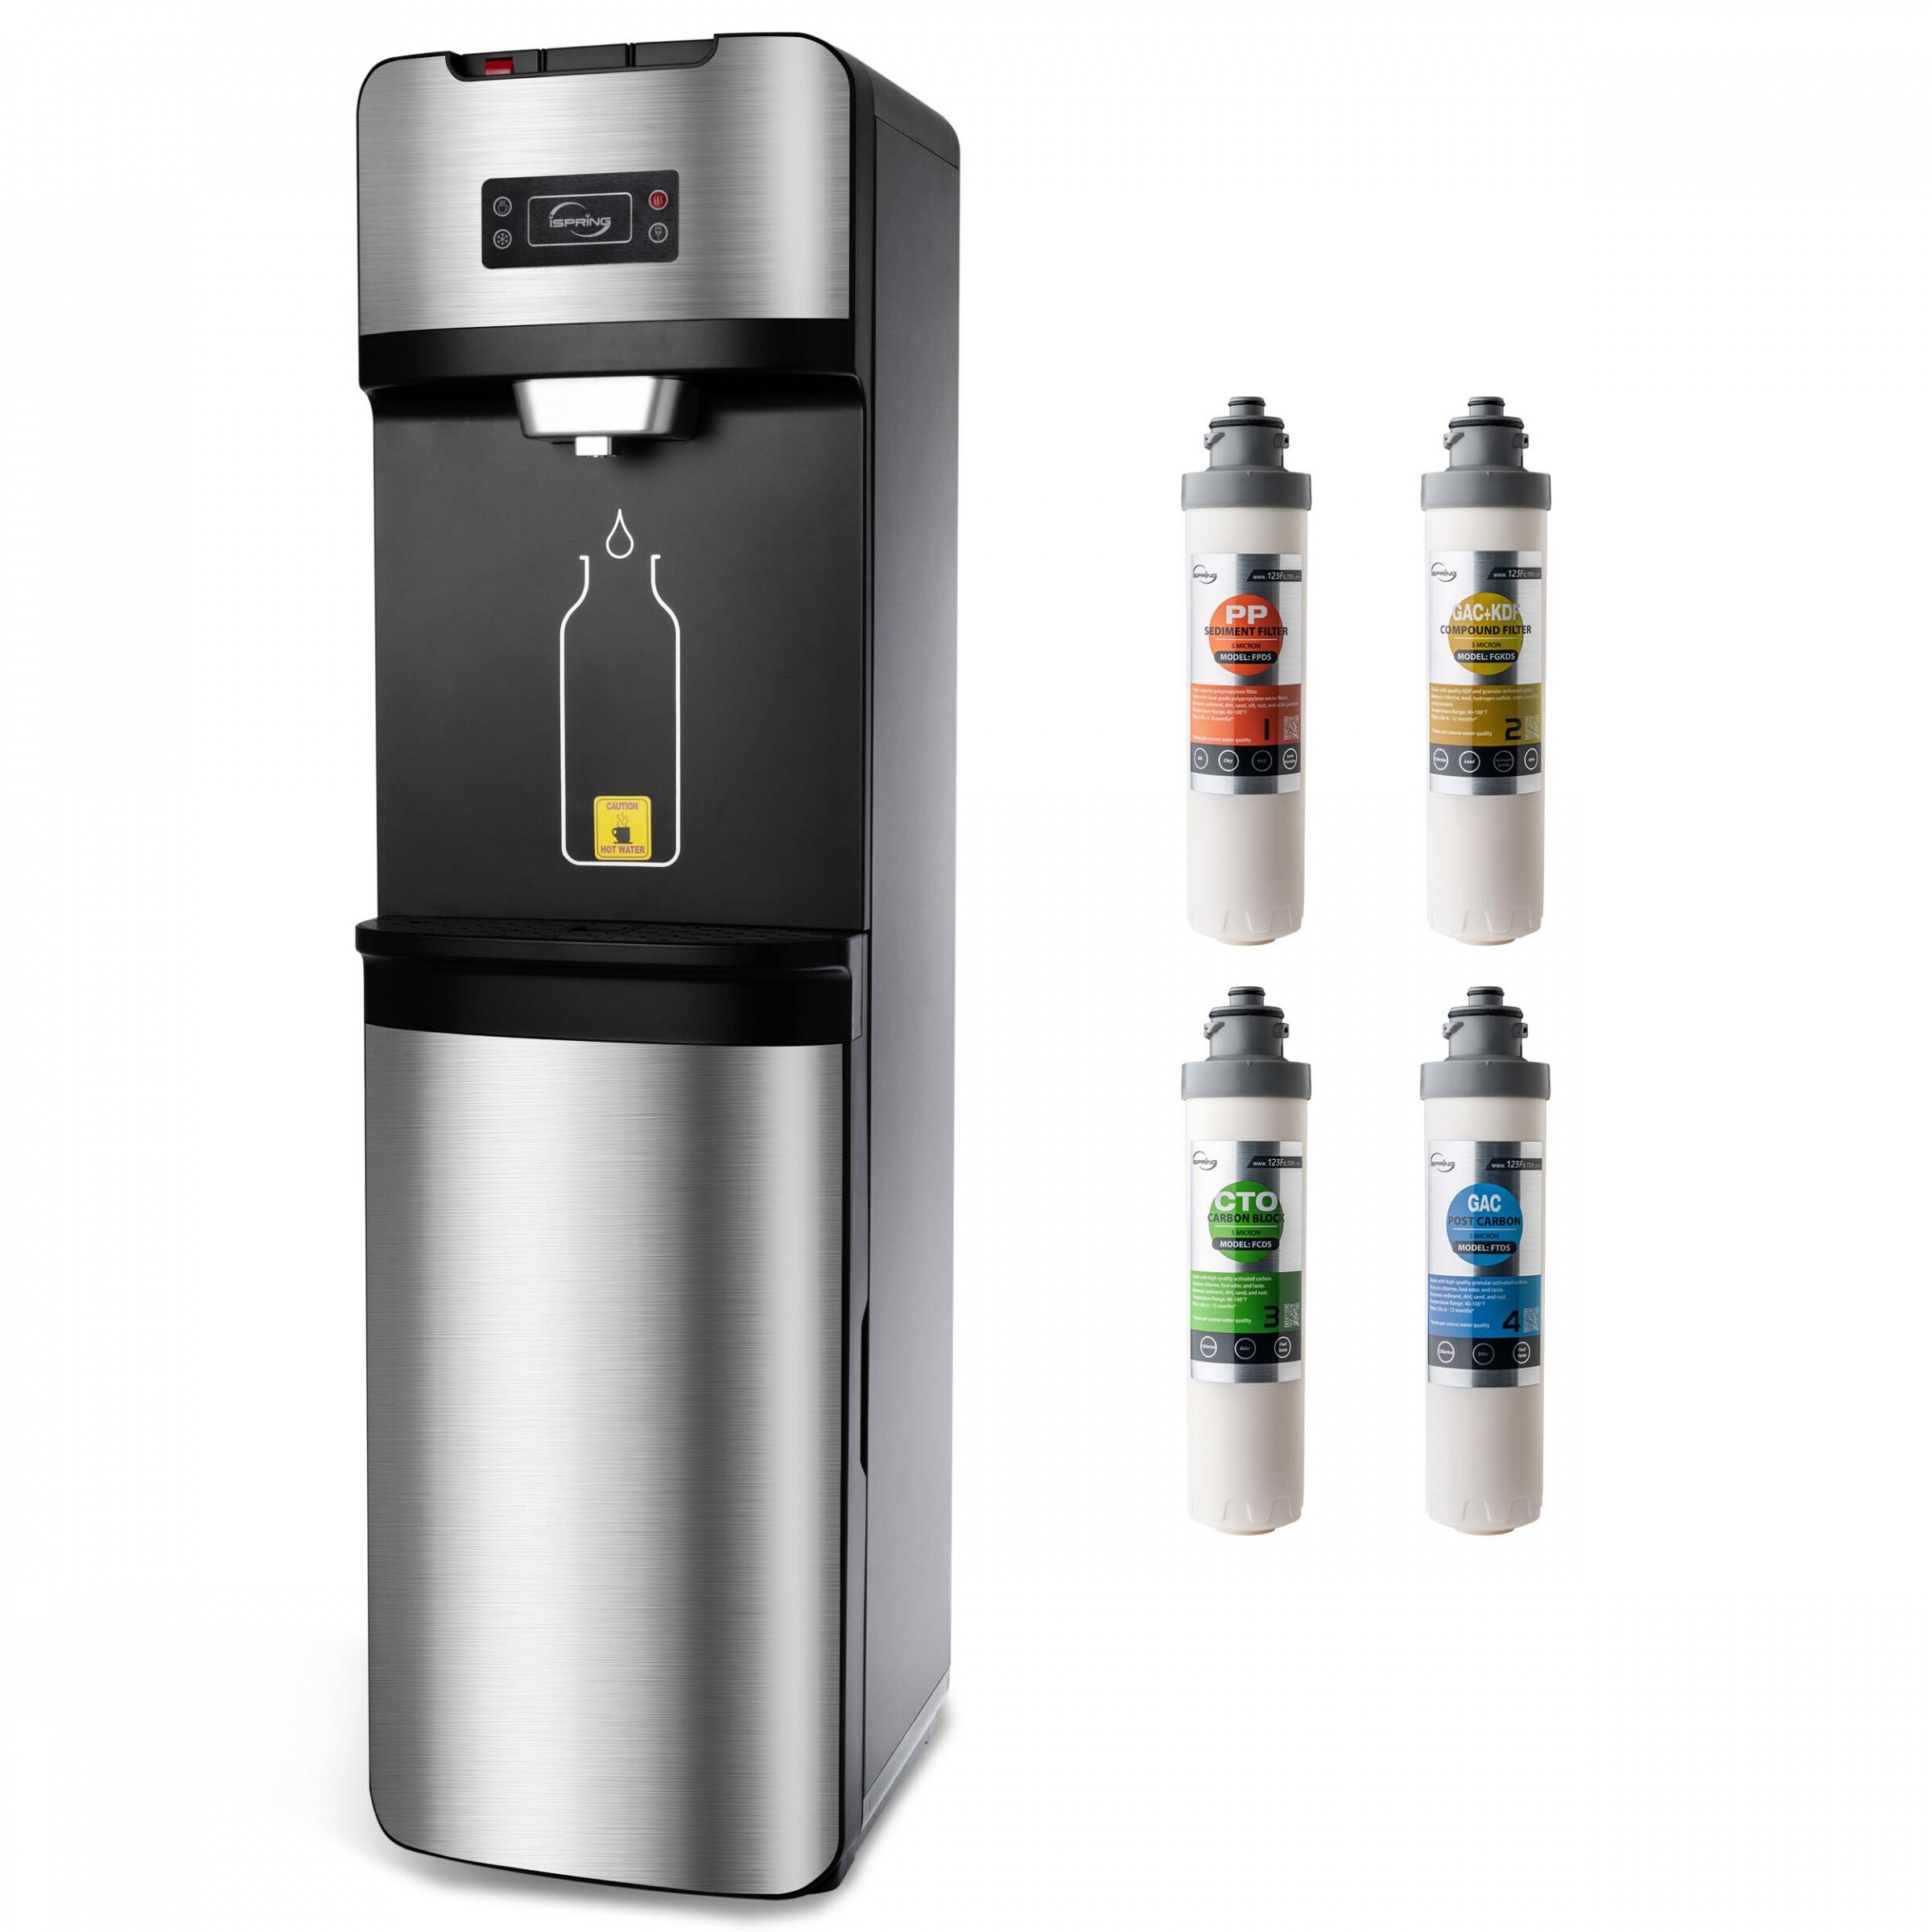 42-Inch Commercial Grade Freestanding Water Cooler Dispenser Color : Gold Bottom Loading Water Cooler Water Dispenser With Child Safety Lock Hot Room and Cold Temperatures with 3 Tray Positions 